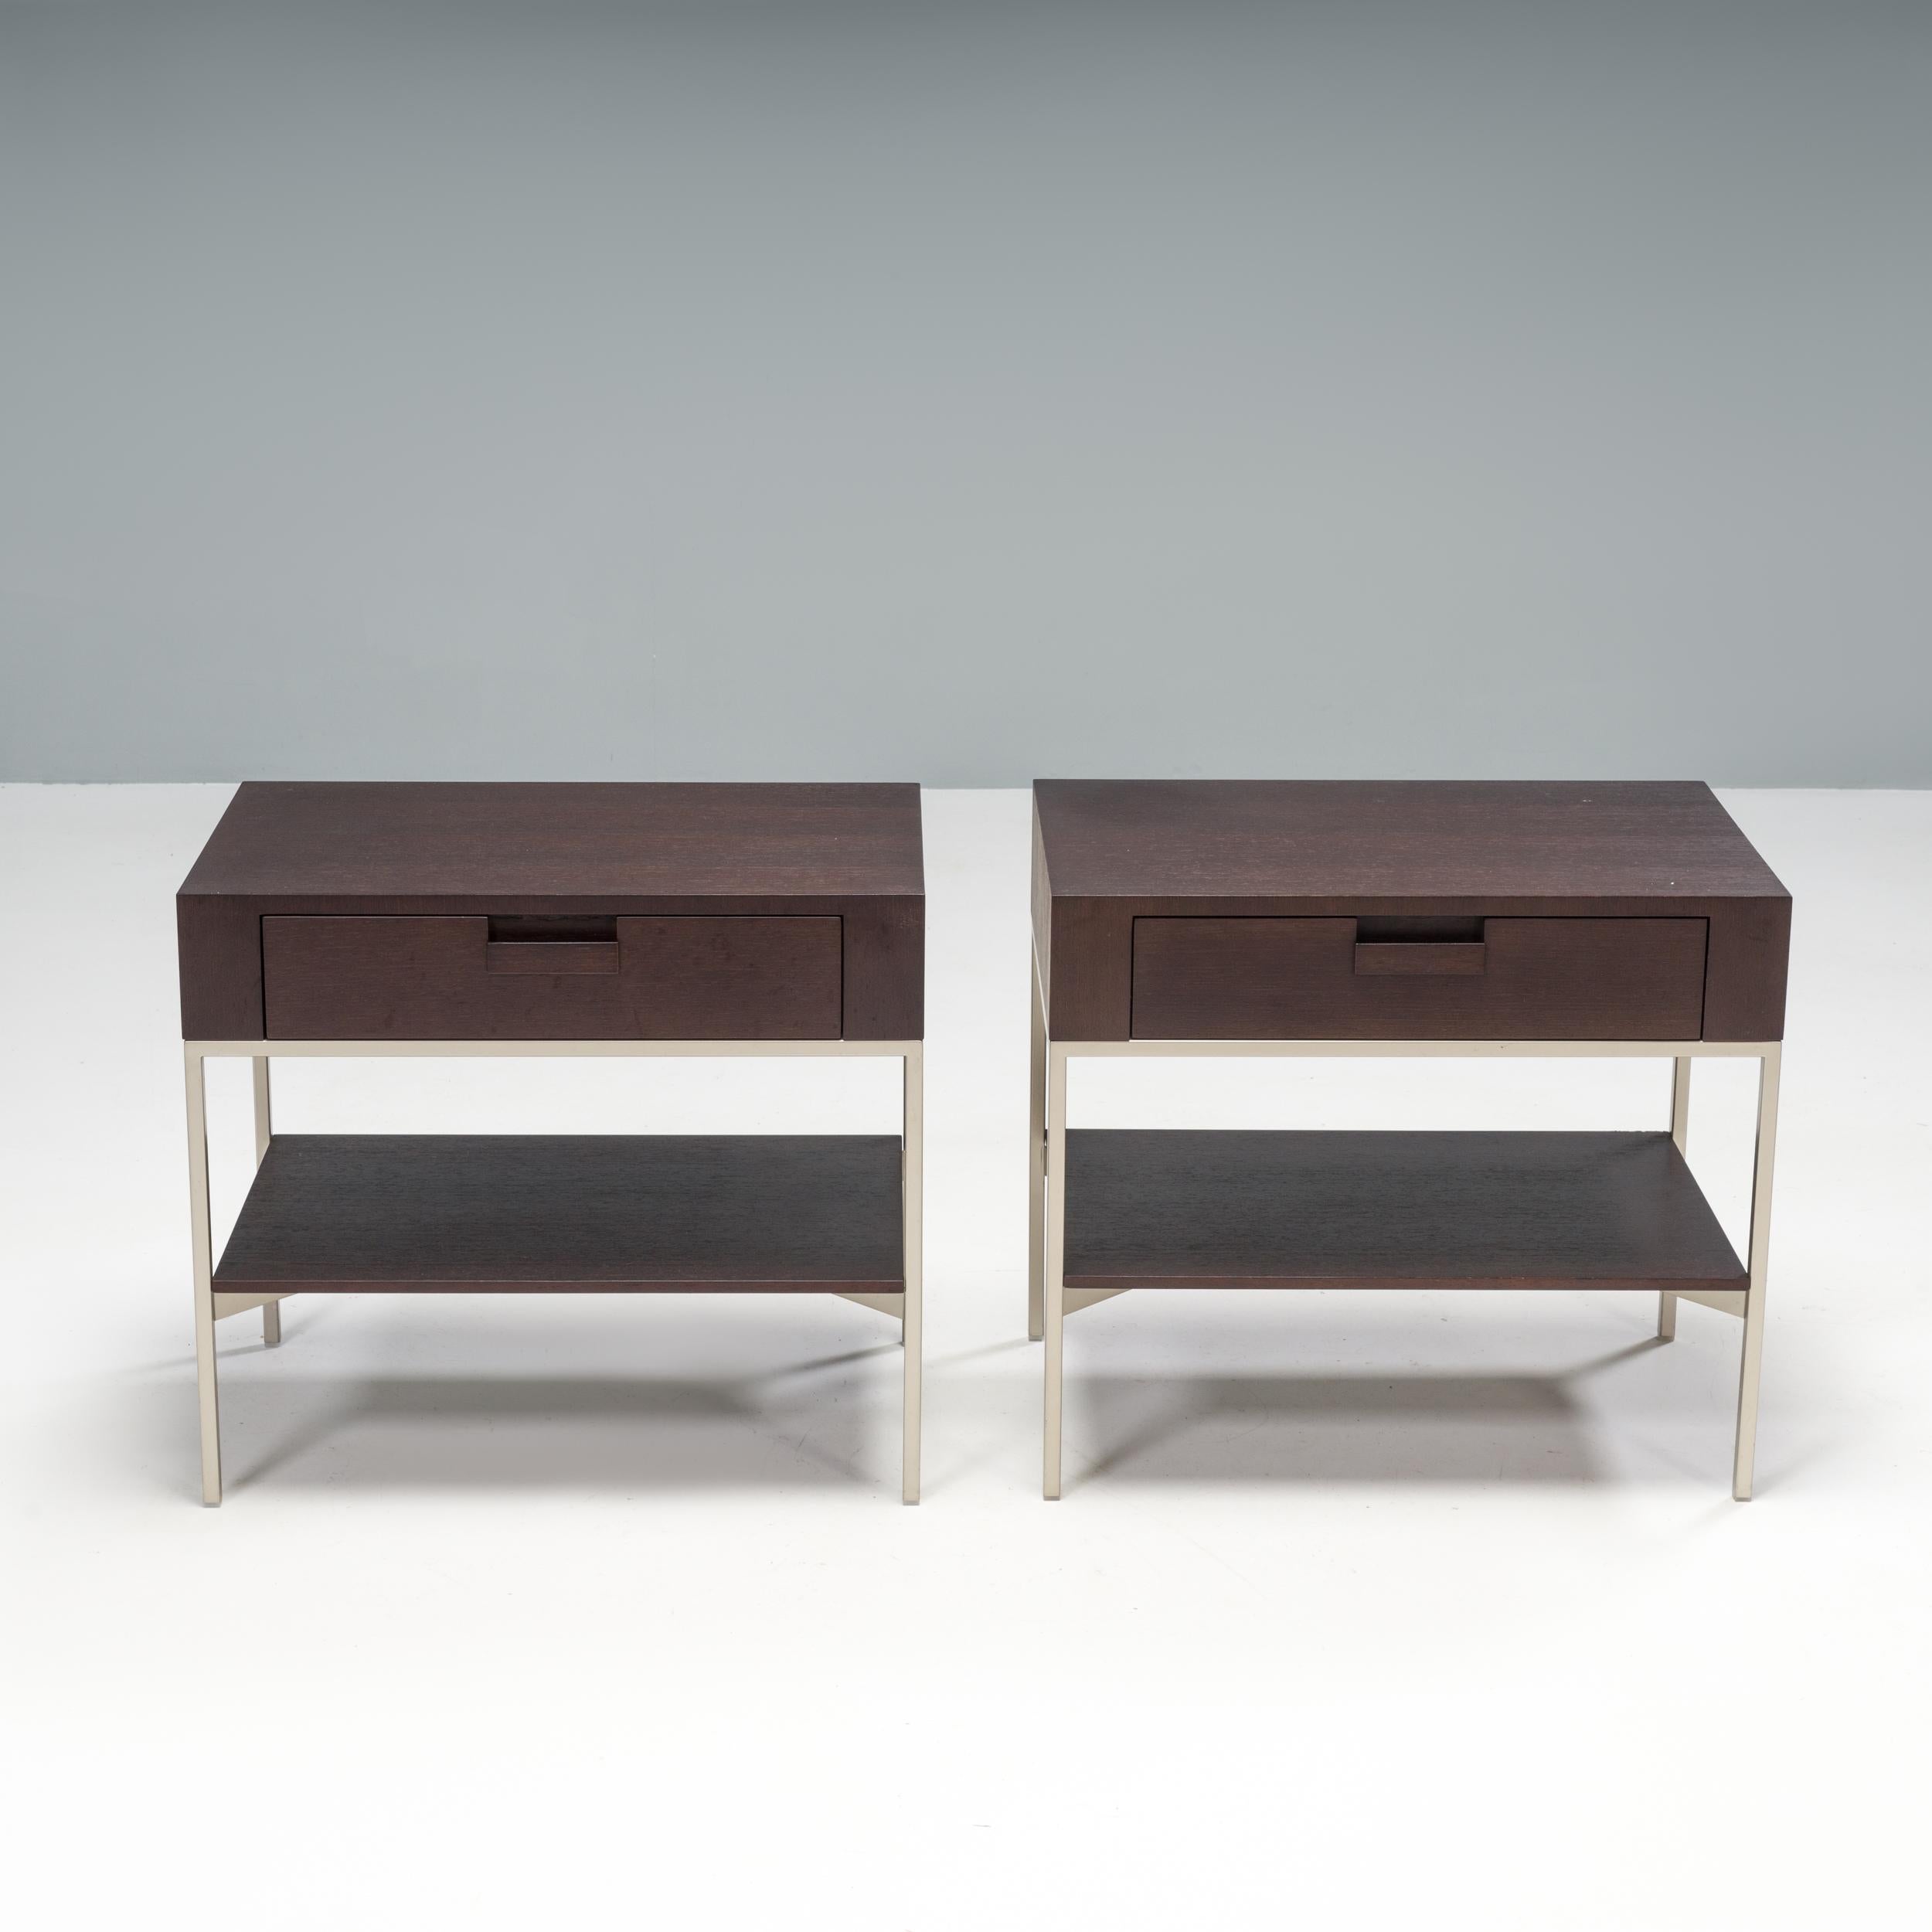 Originally designed by Antonio Citterio for Maxalto in 1996, the Ebe low table is a sleek, classic example of Italian design.

Constructed from grey oak, the tables sit on a slimline bright chrome frame and feature a single drawer unit with an